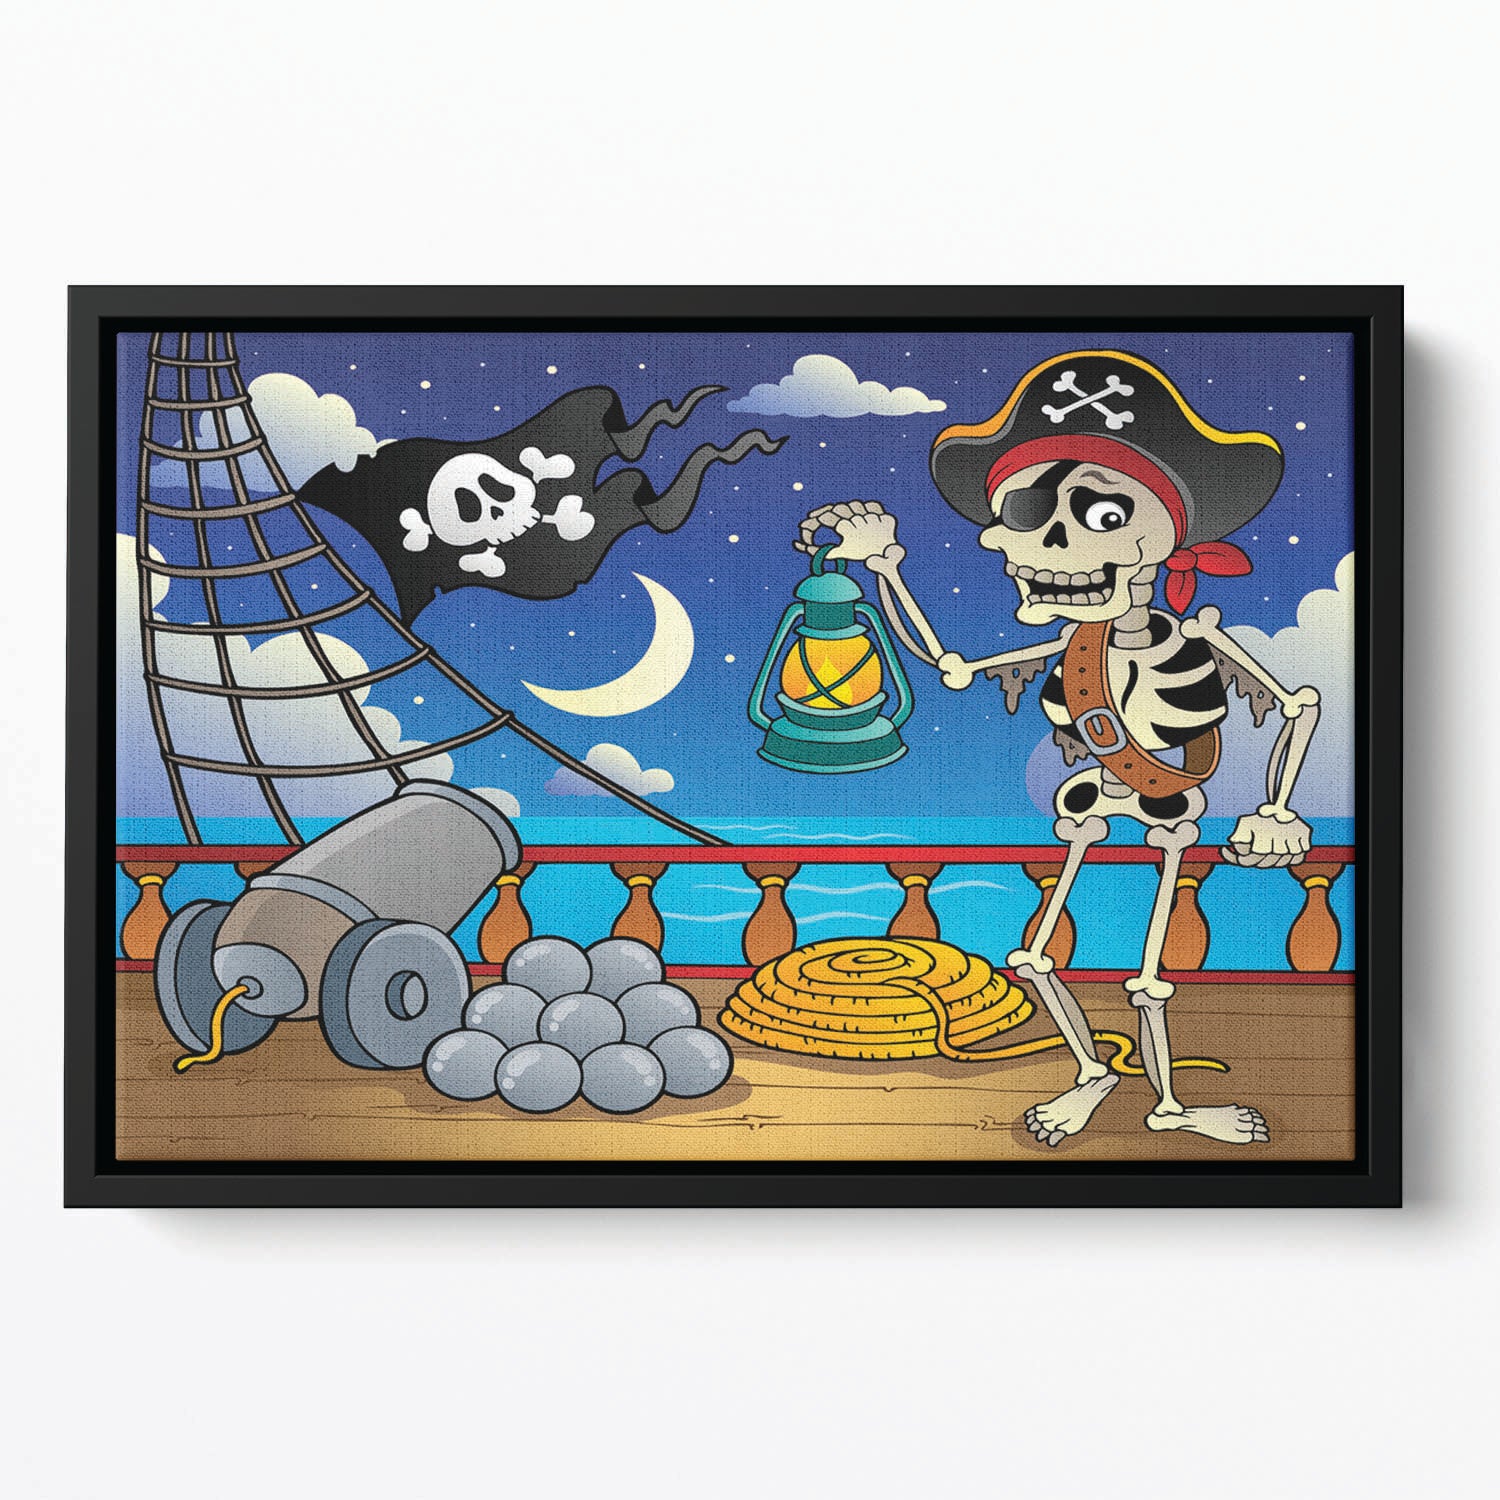 Pirate ship deck theme 6 Floating Framed Canvas